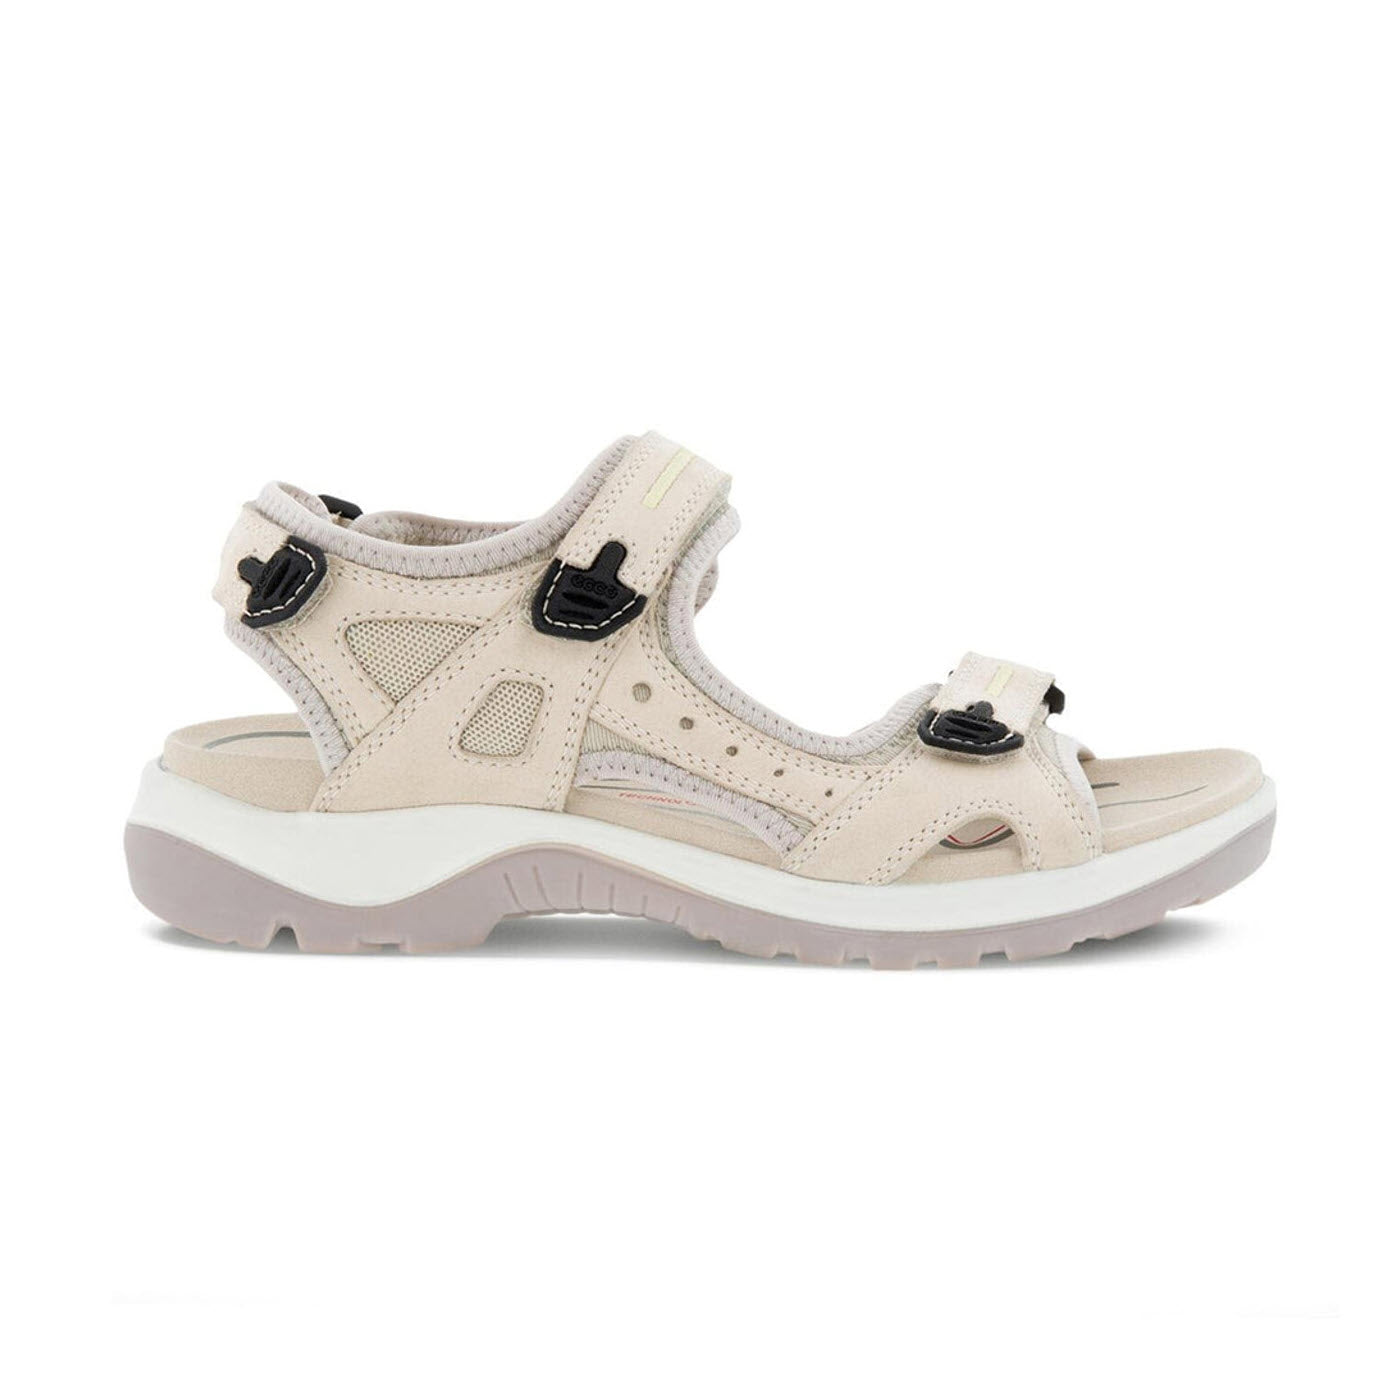 A beige open-toe sandal with multiple adjustable straps and a thick, textured rubber sole designed for everyday walking comfort and support, the Ecco ECCO OFFROAD YUCATAN LIMESTONE MULTI - WOMENS is perfect for all-day wear.